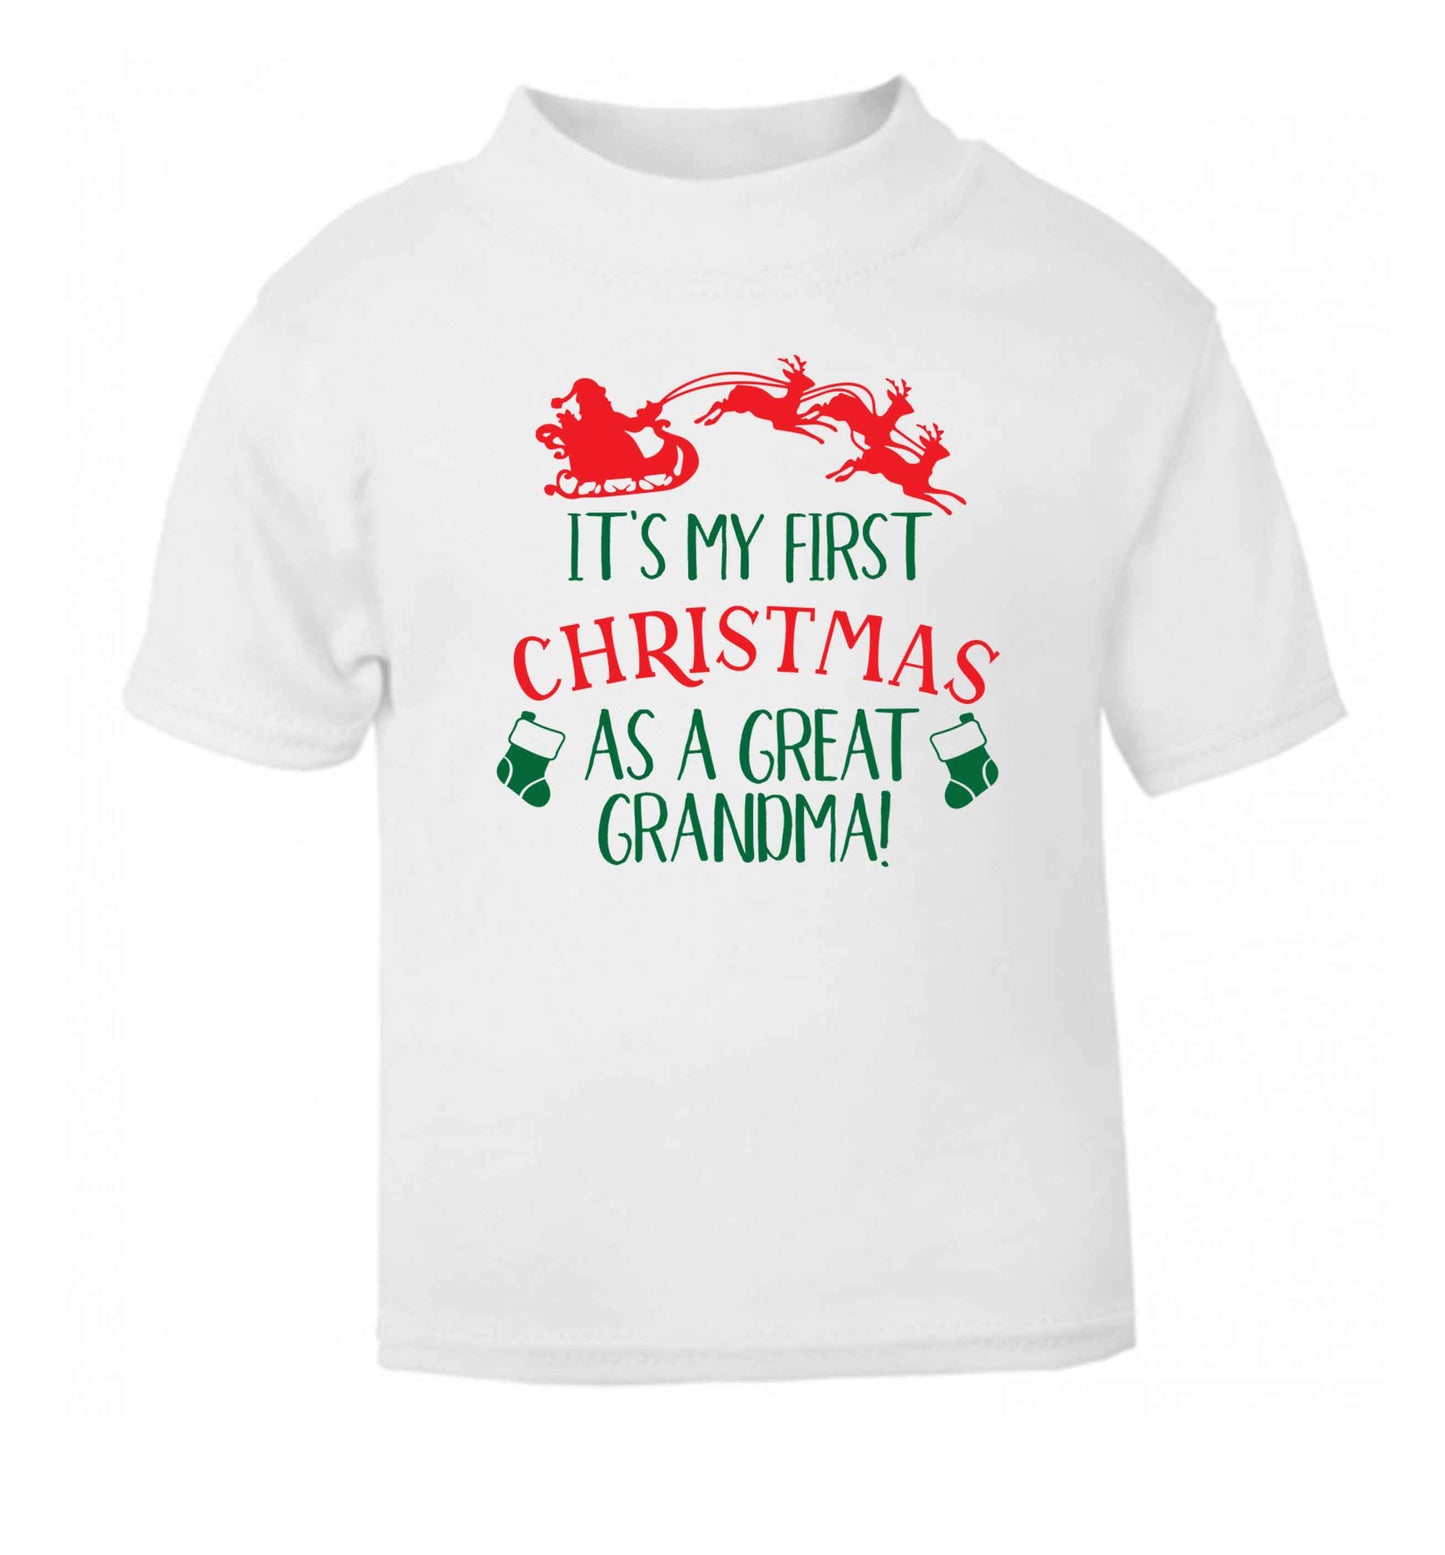 It's my first Christmas as a great grandma! white Baby Toddler Tshirt 2 Years